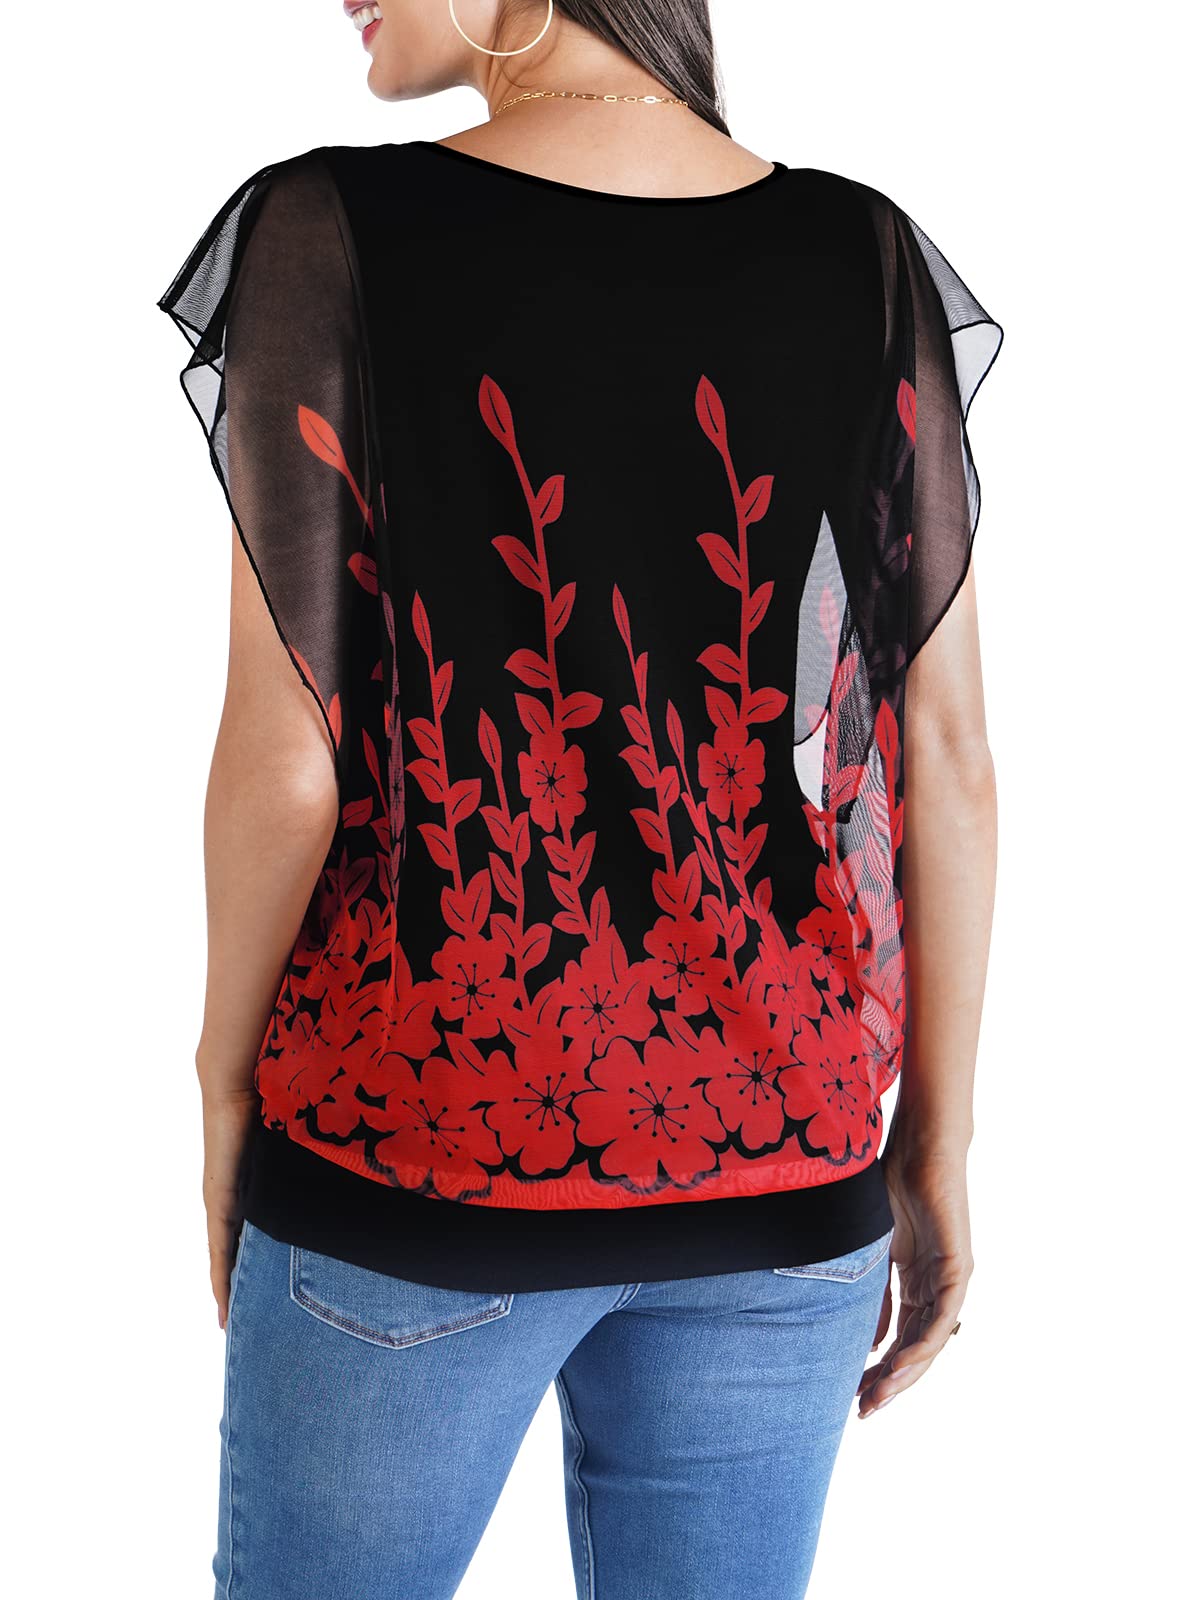 BAISHENGGT Red Floral Women's Printed Flouncing Flared Short Sleeve Mesh Blouse Tops